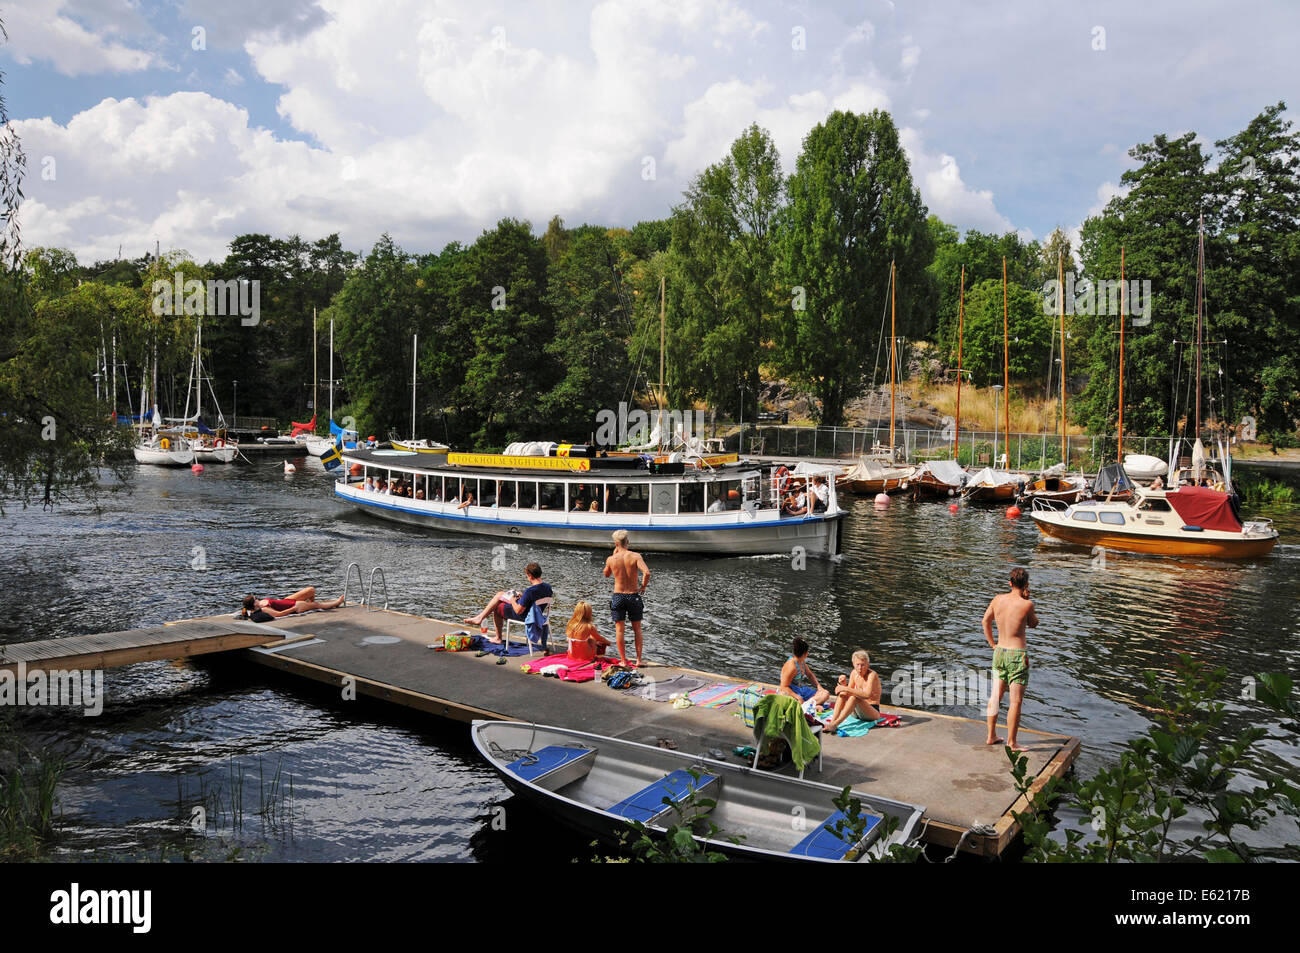 Sightseeing boats and kayakers on Langholmen Långholmen Canal with sunbathers in Stockholm Stock Photo